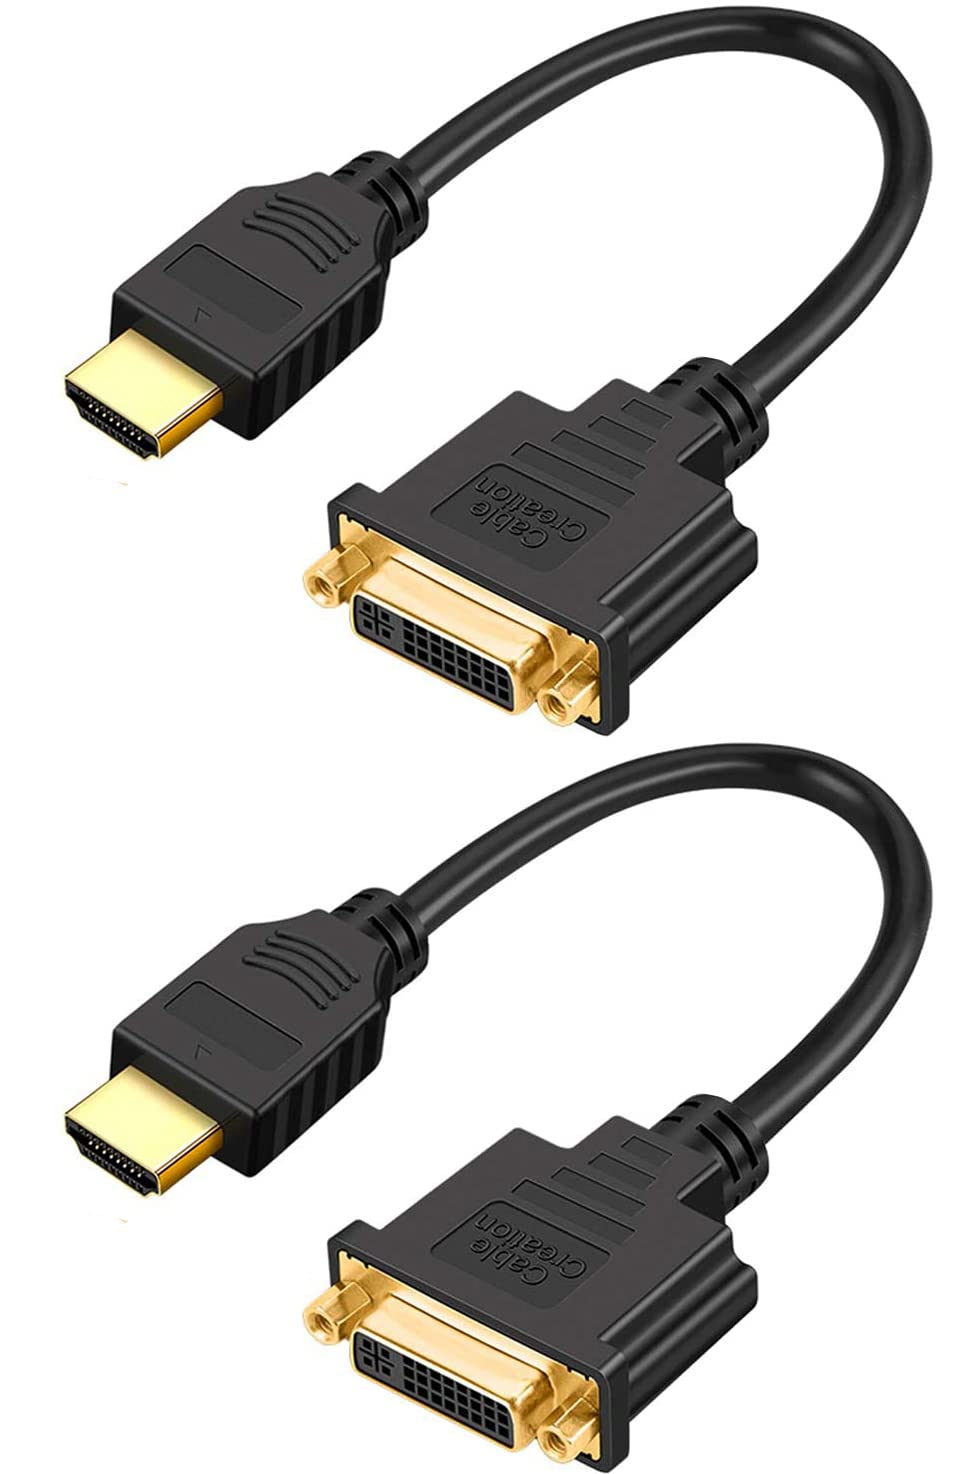  [AUSTRALIA] - HDMI Male to DVI Female 0.5ft [2 Pack], CableCreation Bi-Directional HDMI Male to DVI-I (24+5) Female Adapter, for PC, TV, TV Box, PS5, Blue-ray, Xbox,Switch 0.5ft [2 pack] Black